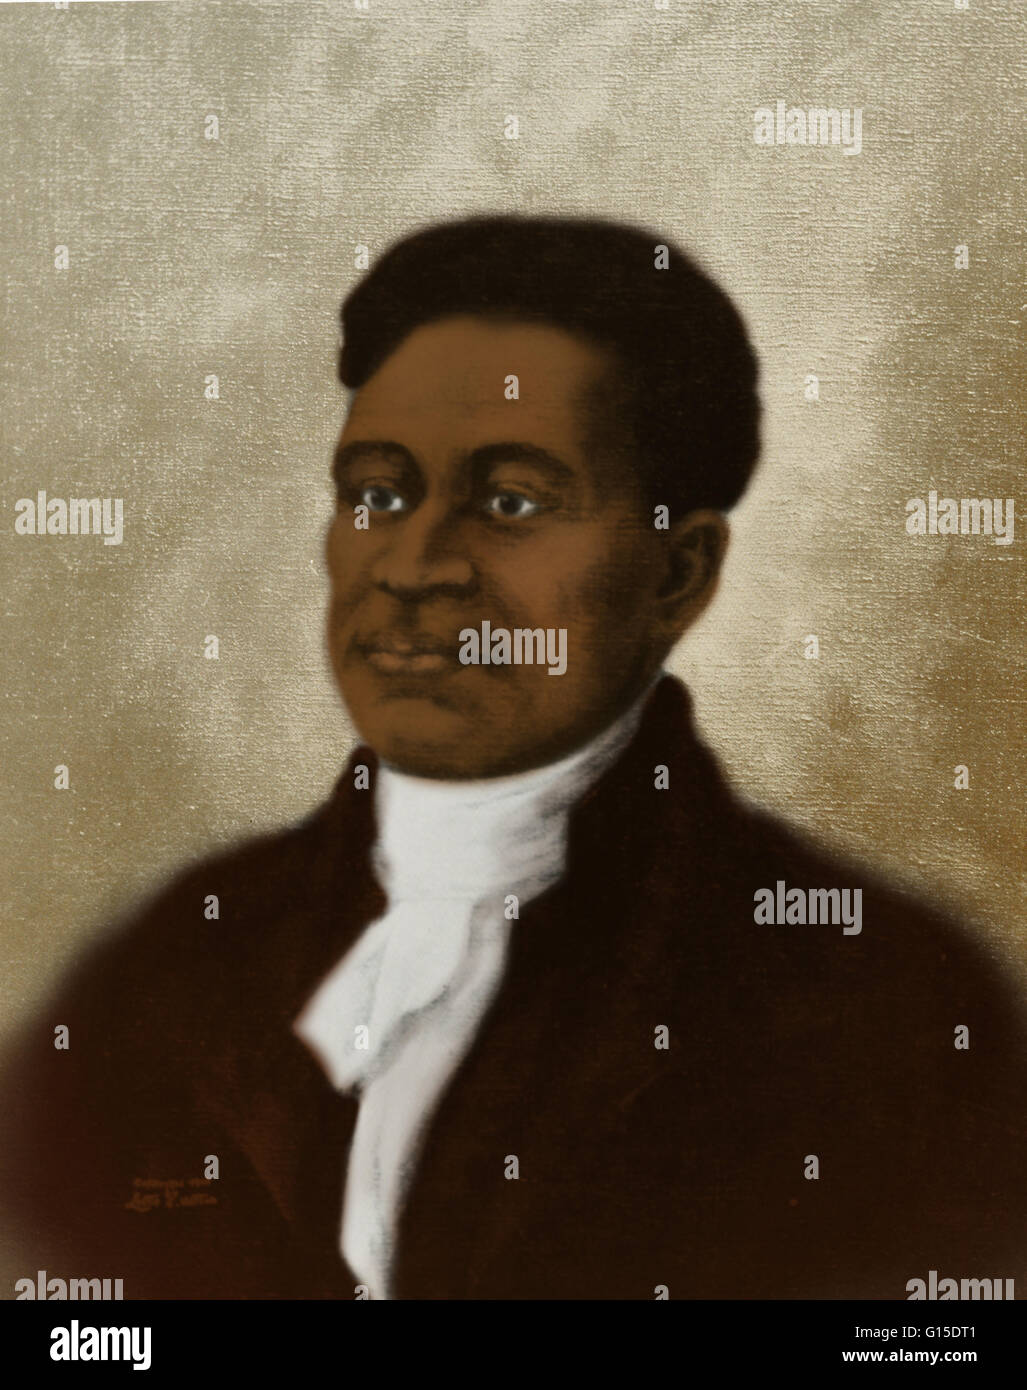 Crispus Attucks (1723 - March 5, 1770) may have been an American slave or freeman, merchant seaman and dockworker of Wampanoag and African descent. His father was an African-born slave and his mother a Natick Indian. He was the first casualty of the Bosto Stock Photo